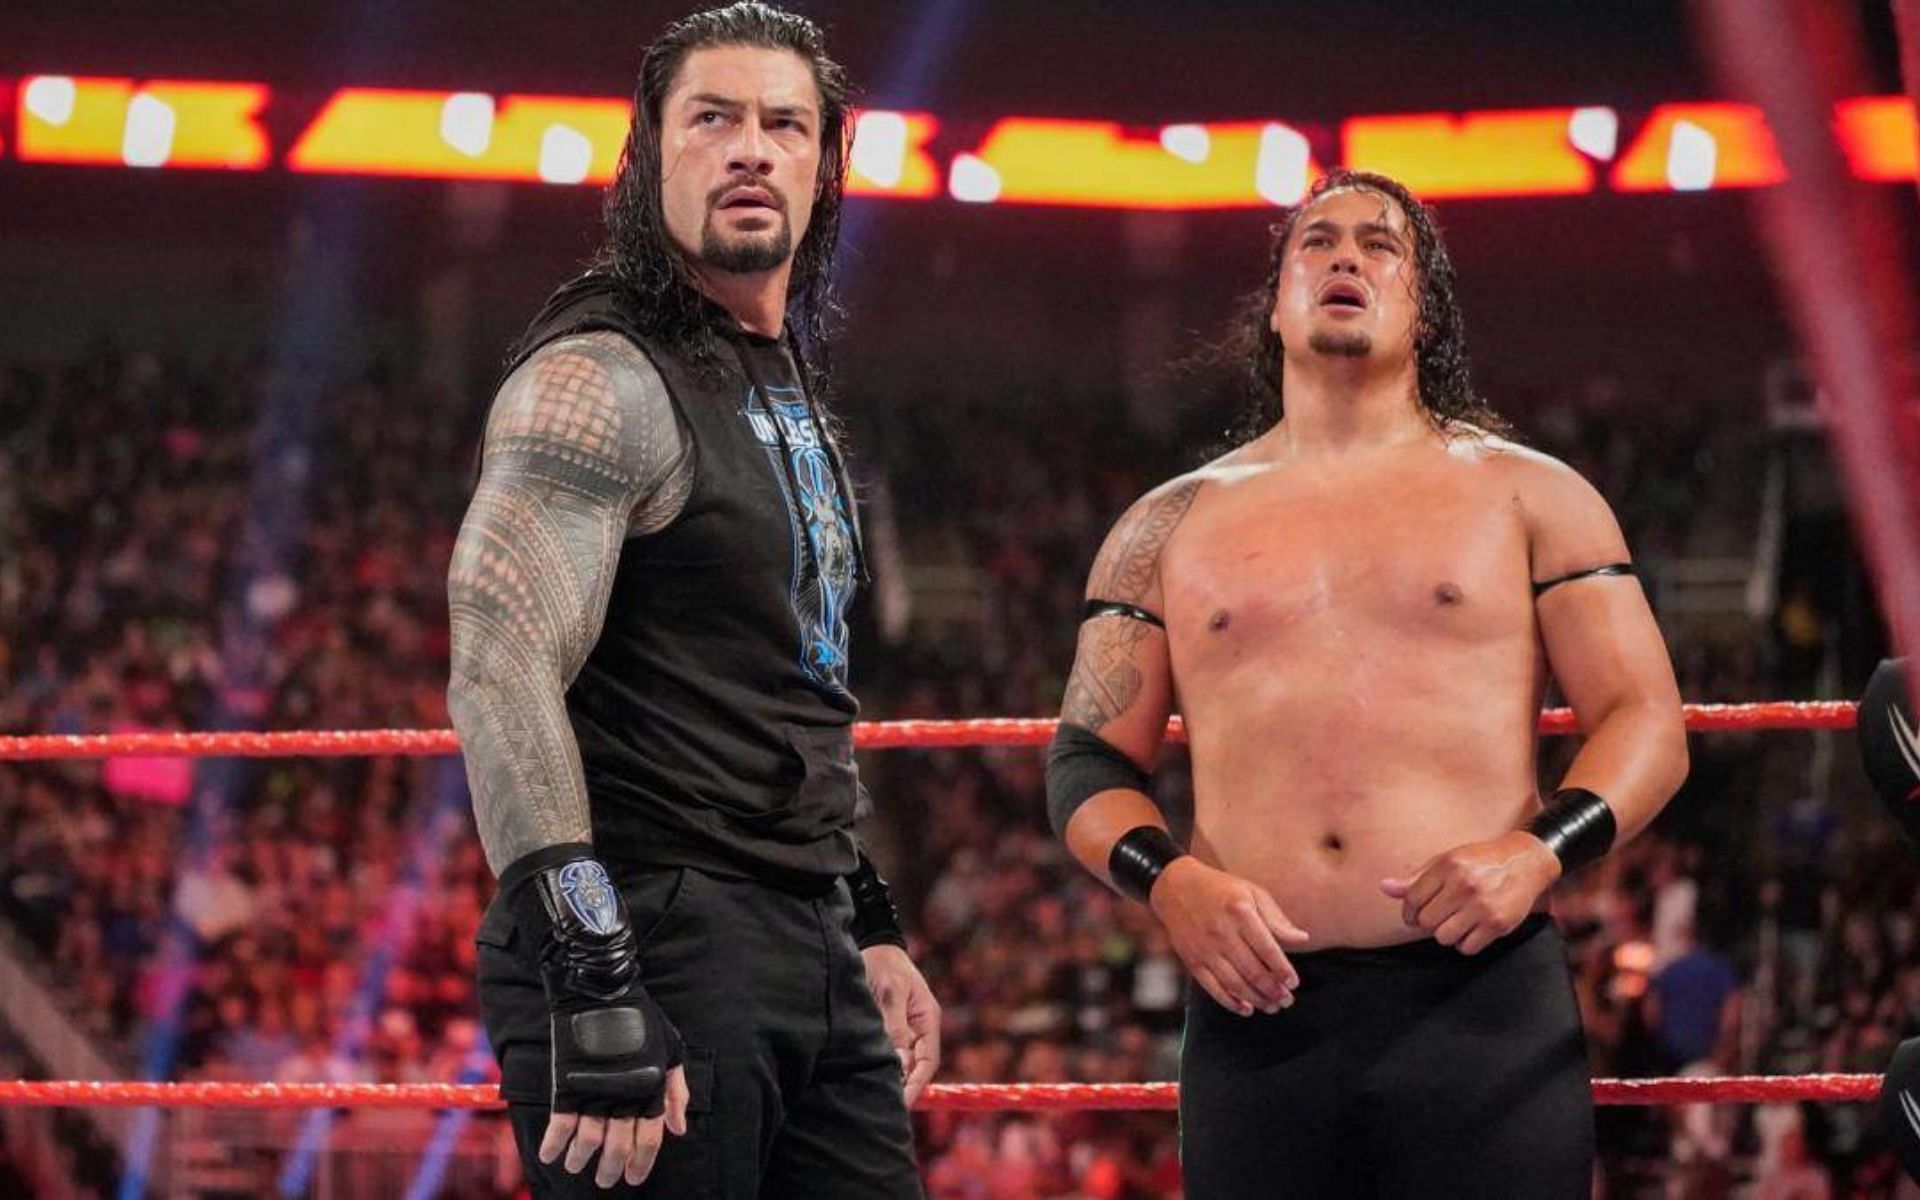 Roman Reigns with his cousin on WWE RAW